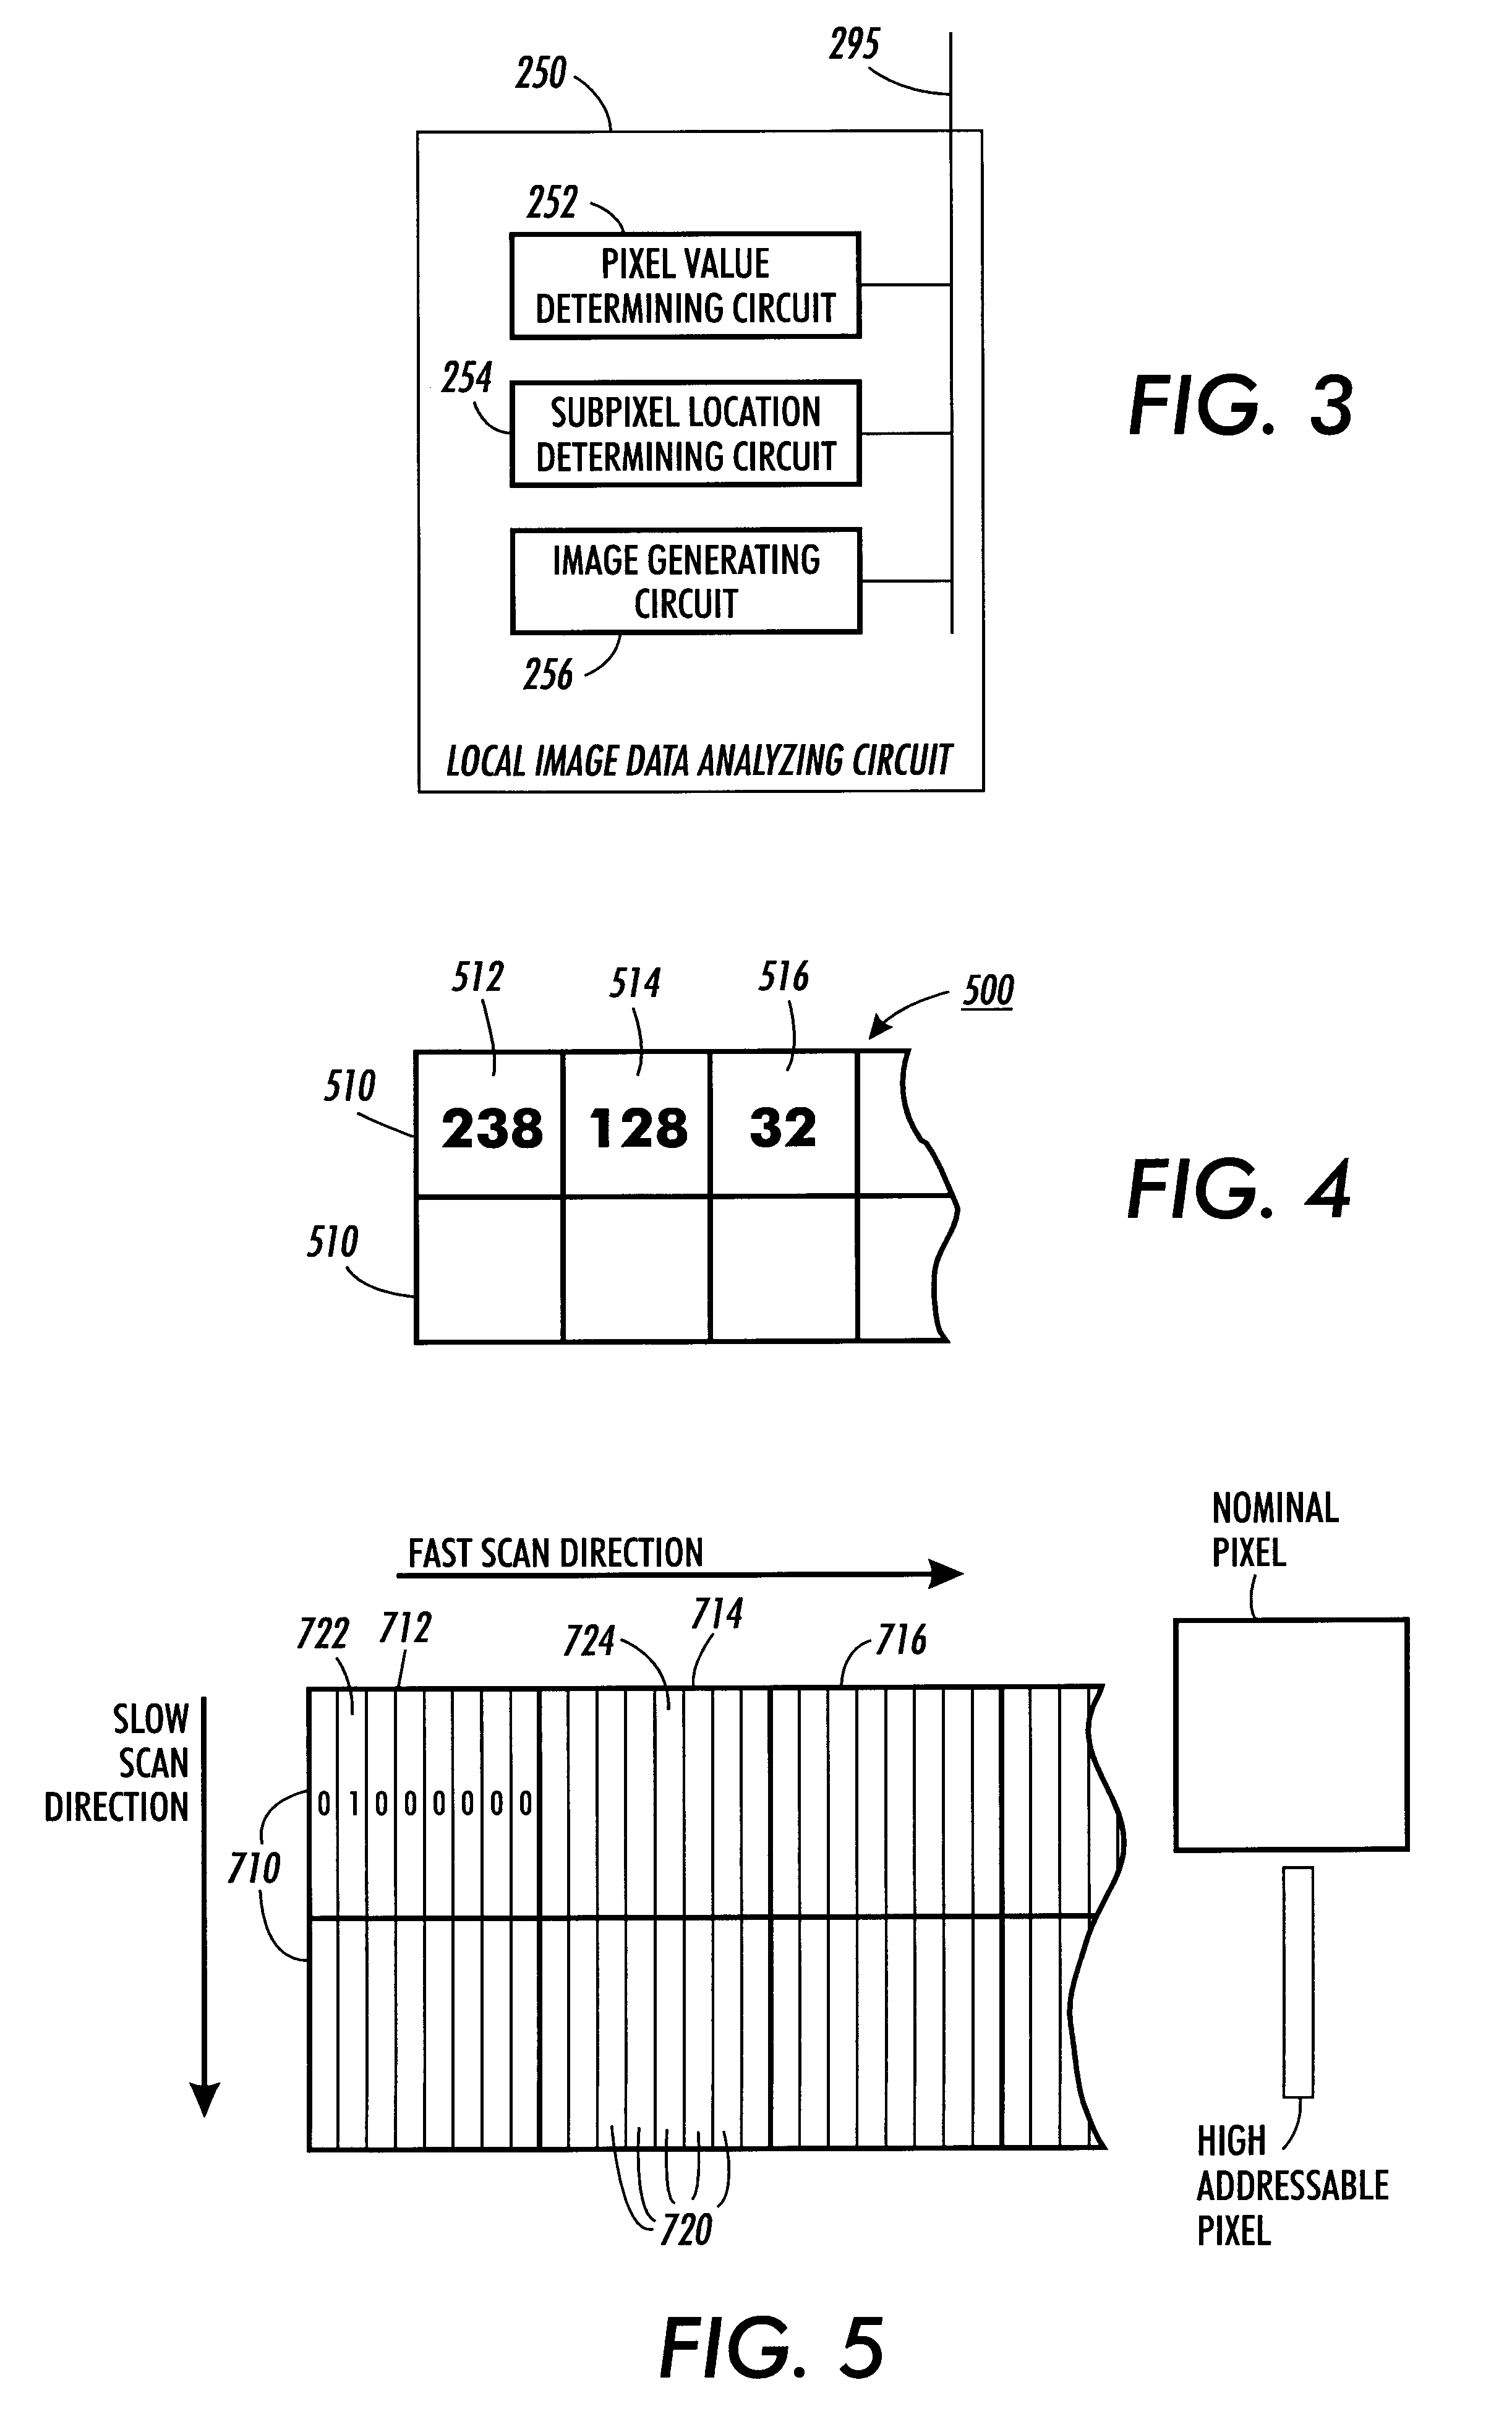 Systems and methods for generating high addressability images